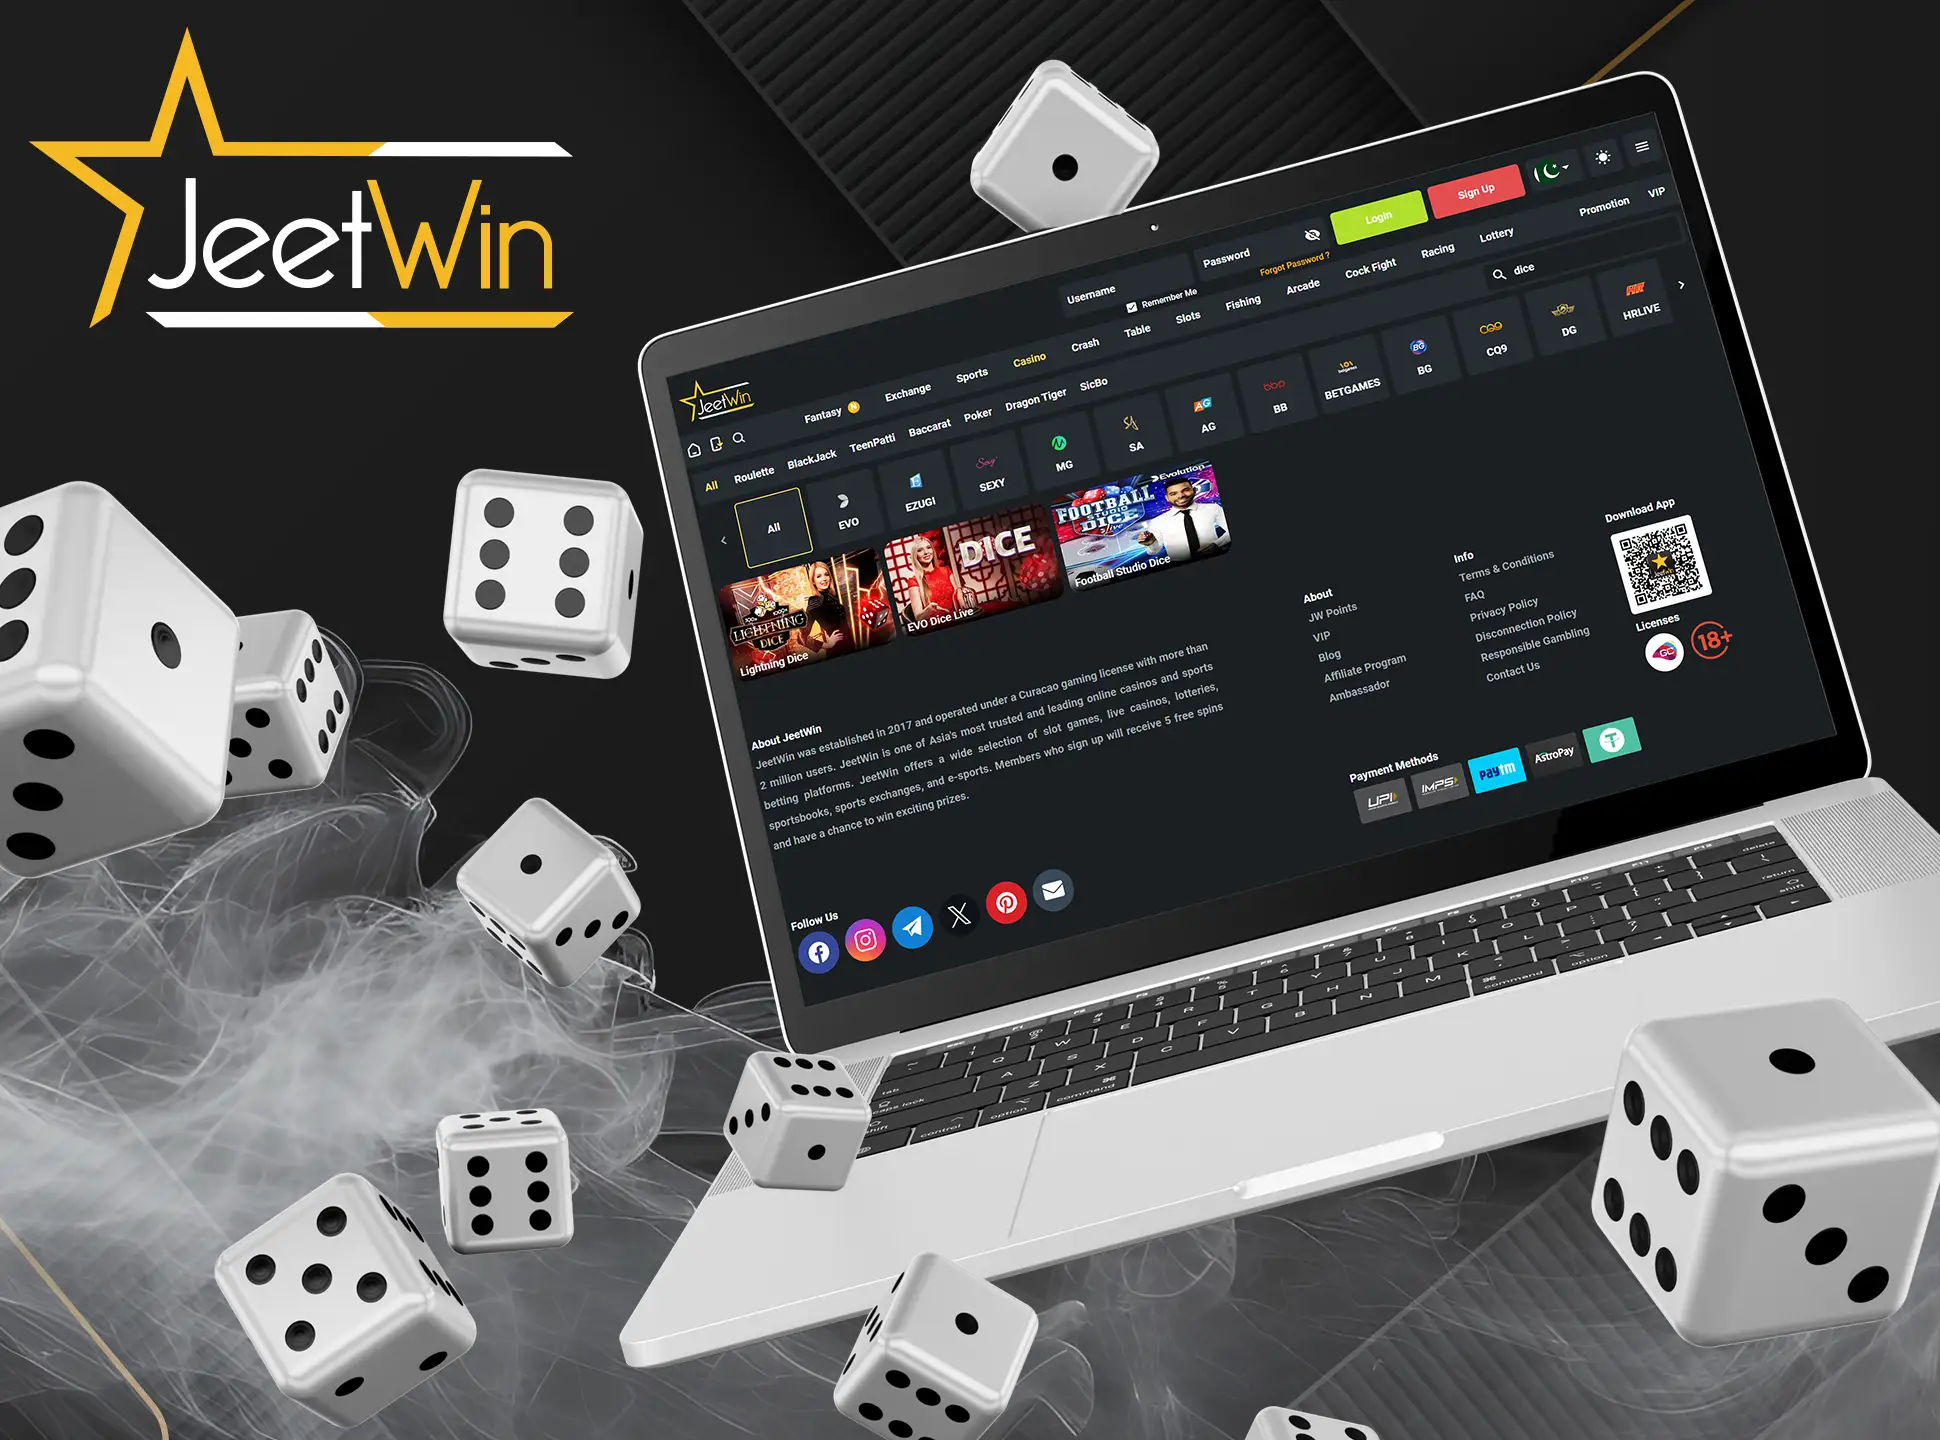 To start playing Dice Games go through the registration process at JeetWin.